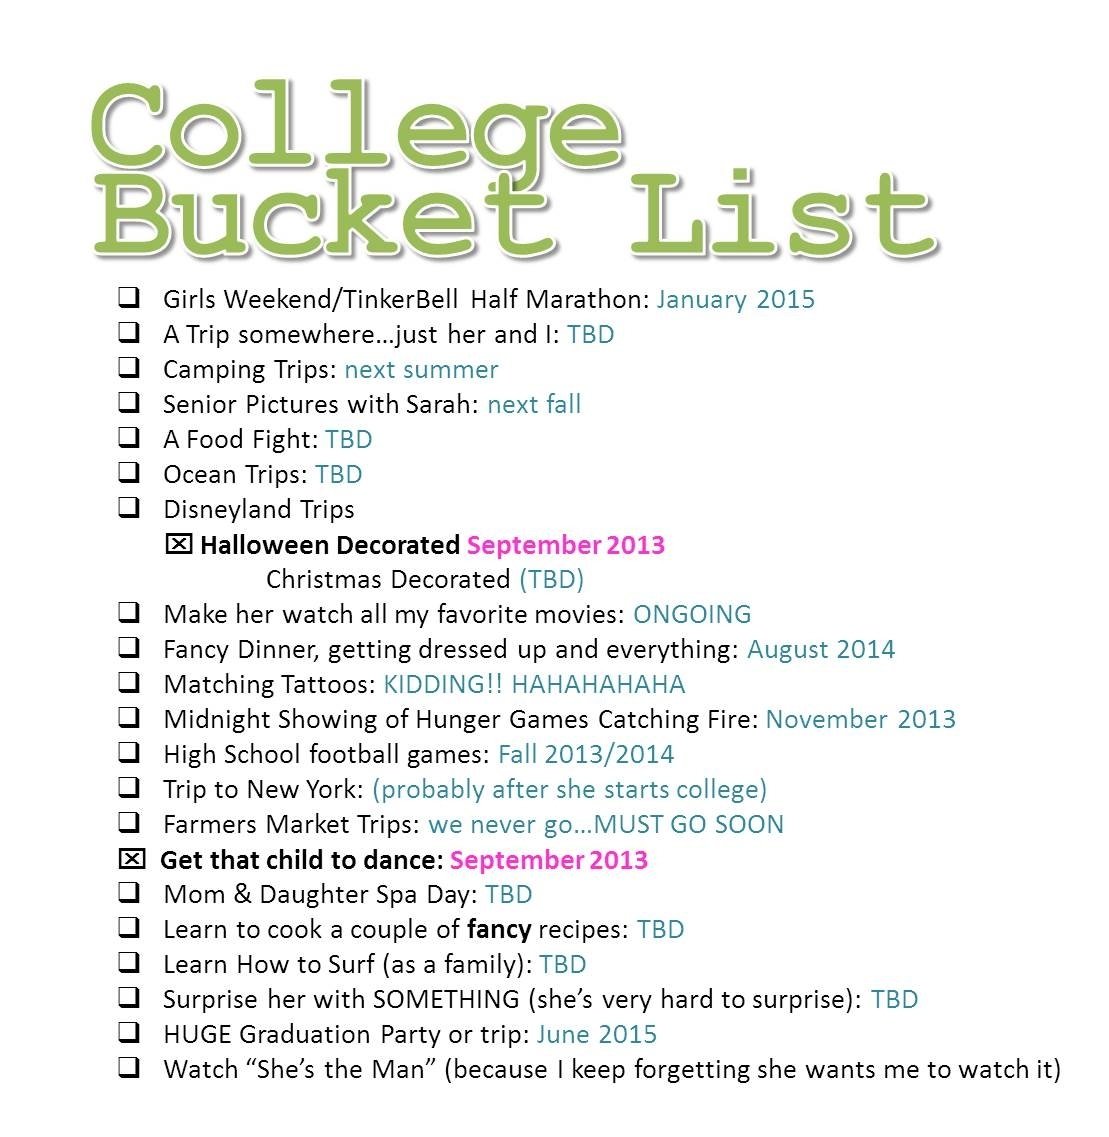 10 Cute Summer Ideas For College Students bingo the college bucket list like the idea would use different 2022